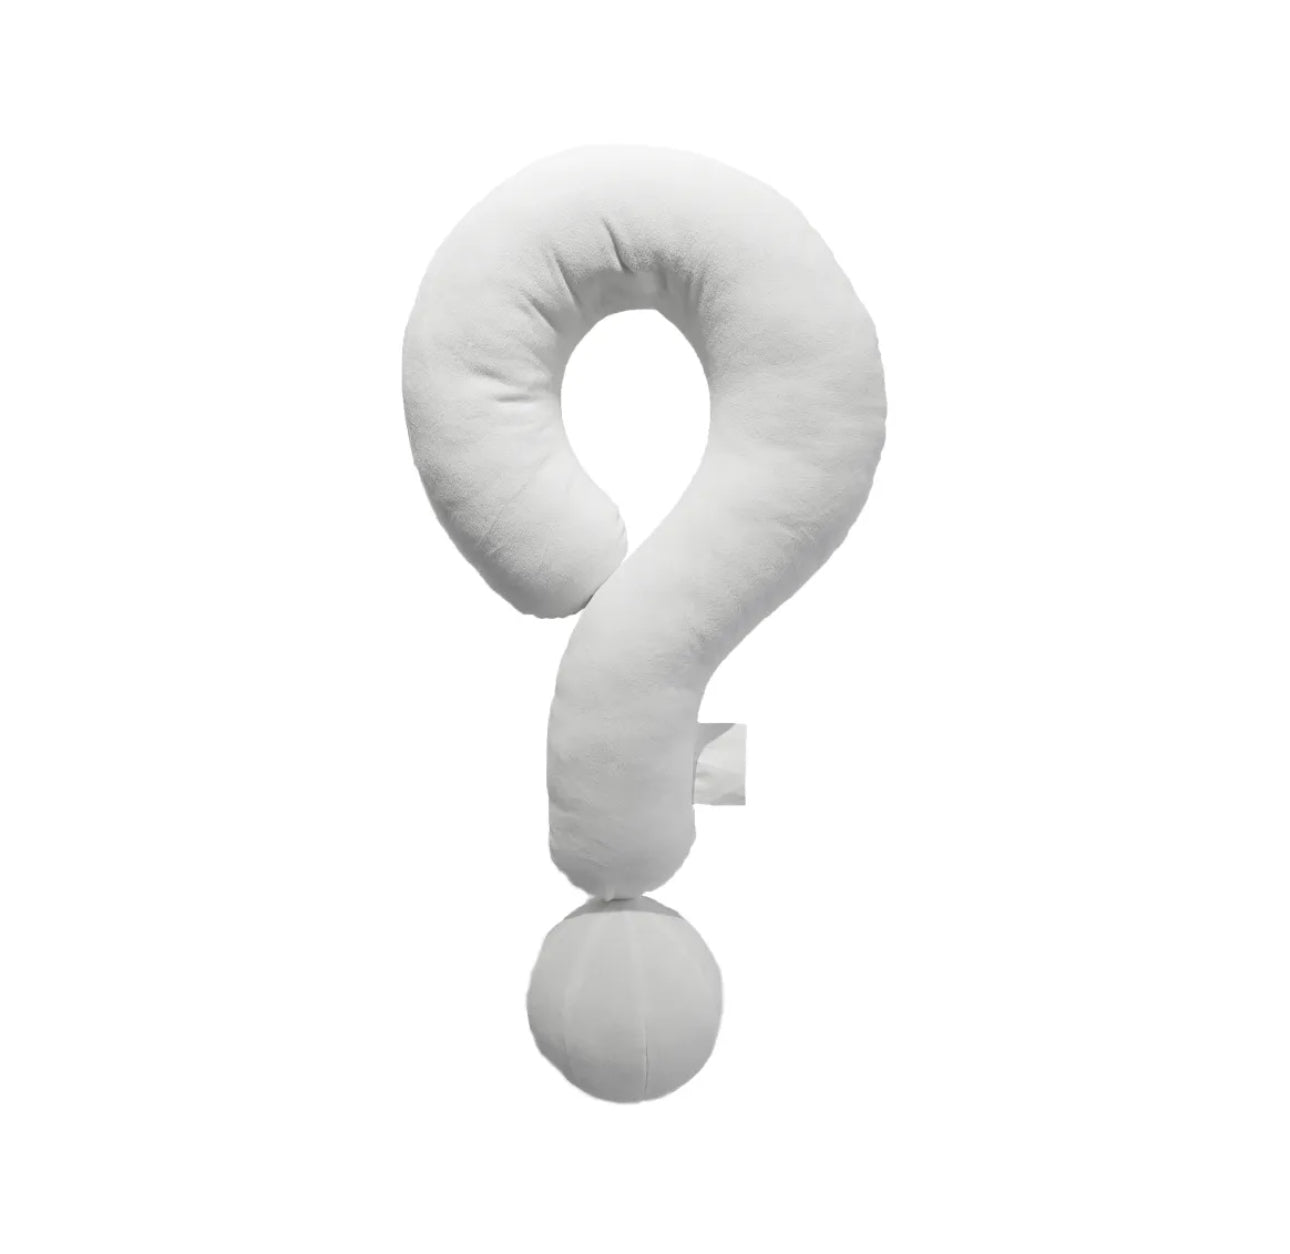 Designer Brand 3me - ❓Question Mark Travel Neck Pillow-Portable Question Mark Travel Pillow Memory Foam Travel Neck Pillows Ergonomic Neck Support Cushion for Sleeping Rest on Airplane Car Train and at Office and Home Use, Purple